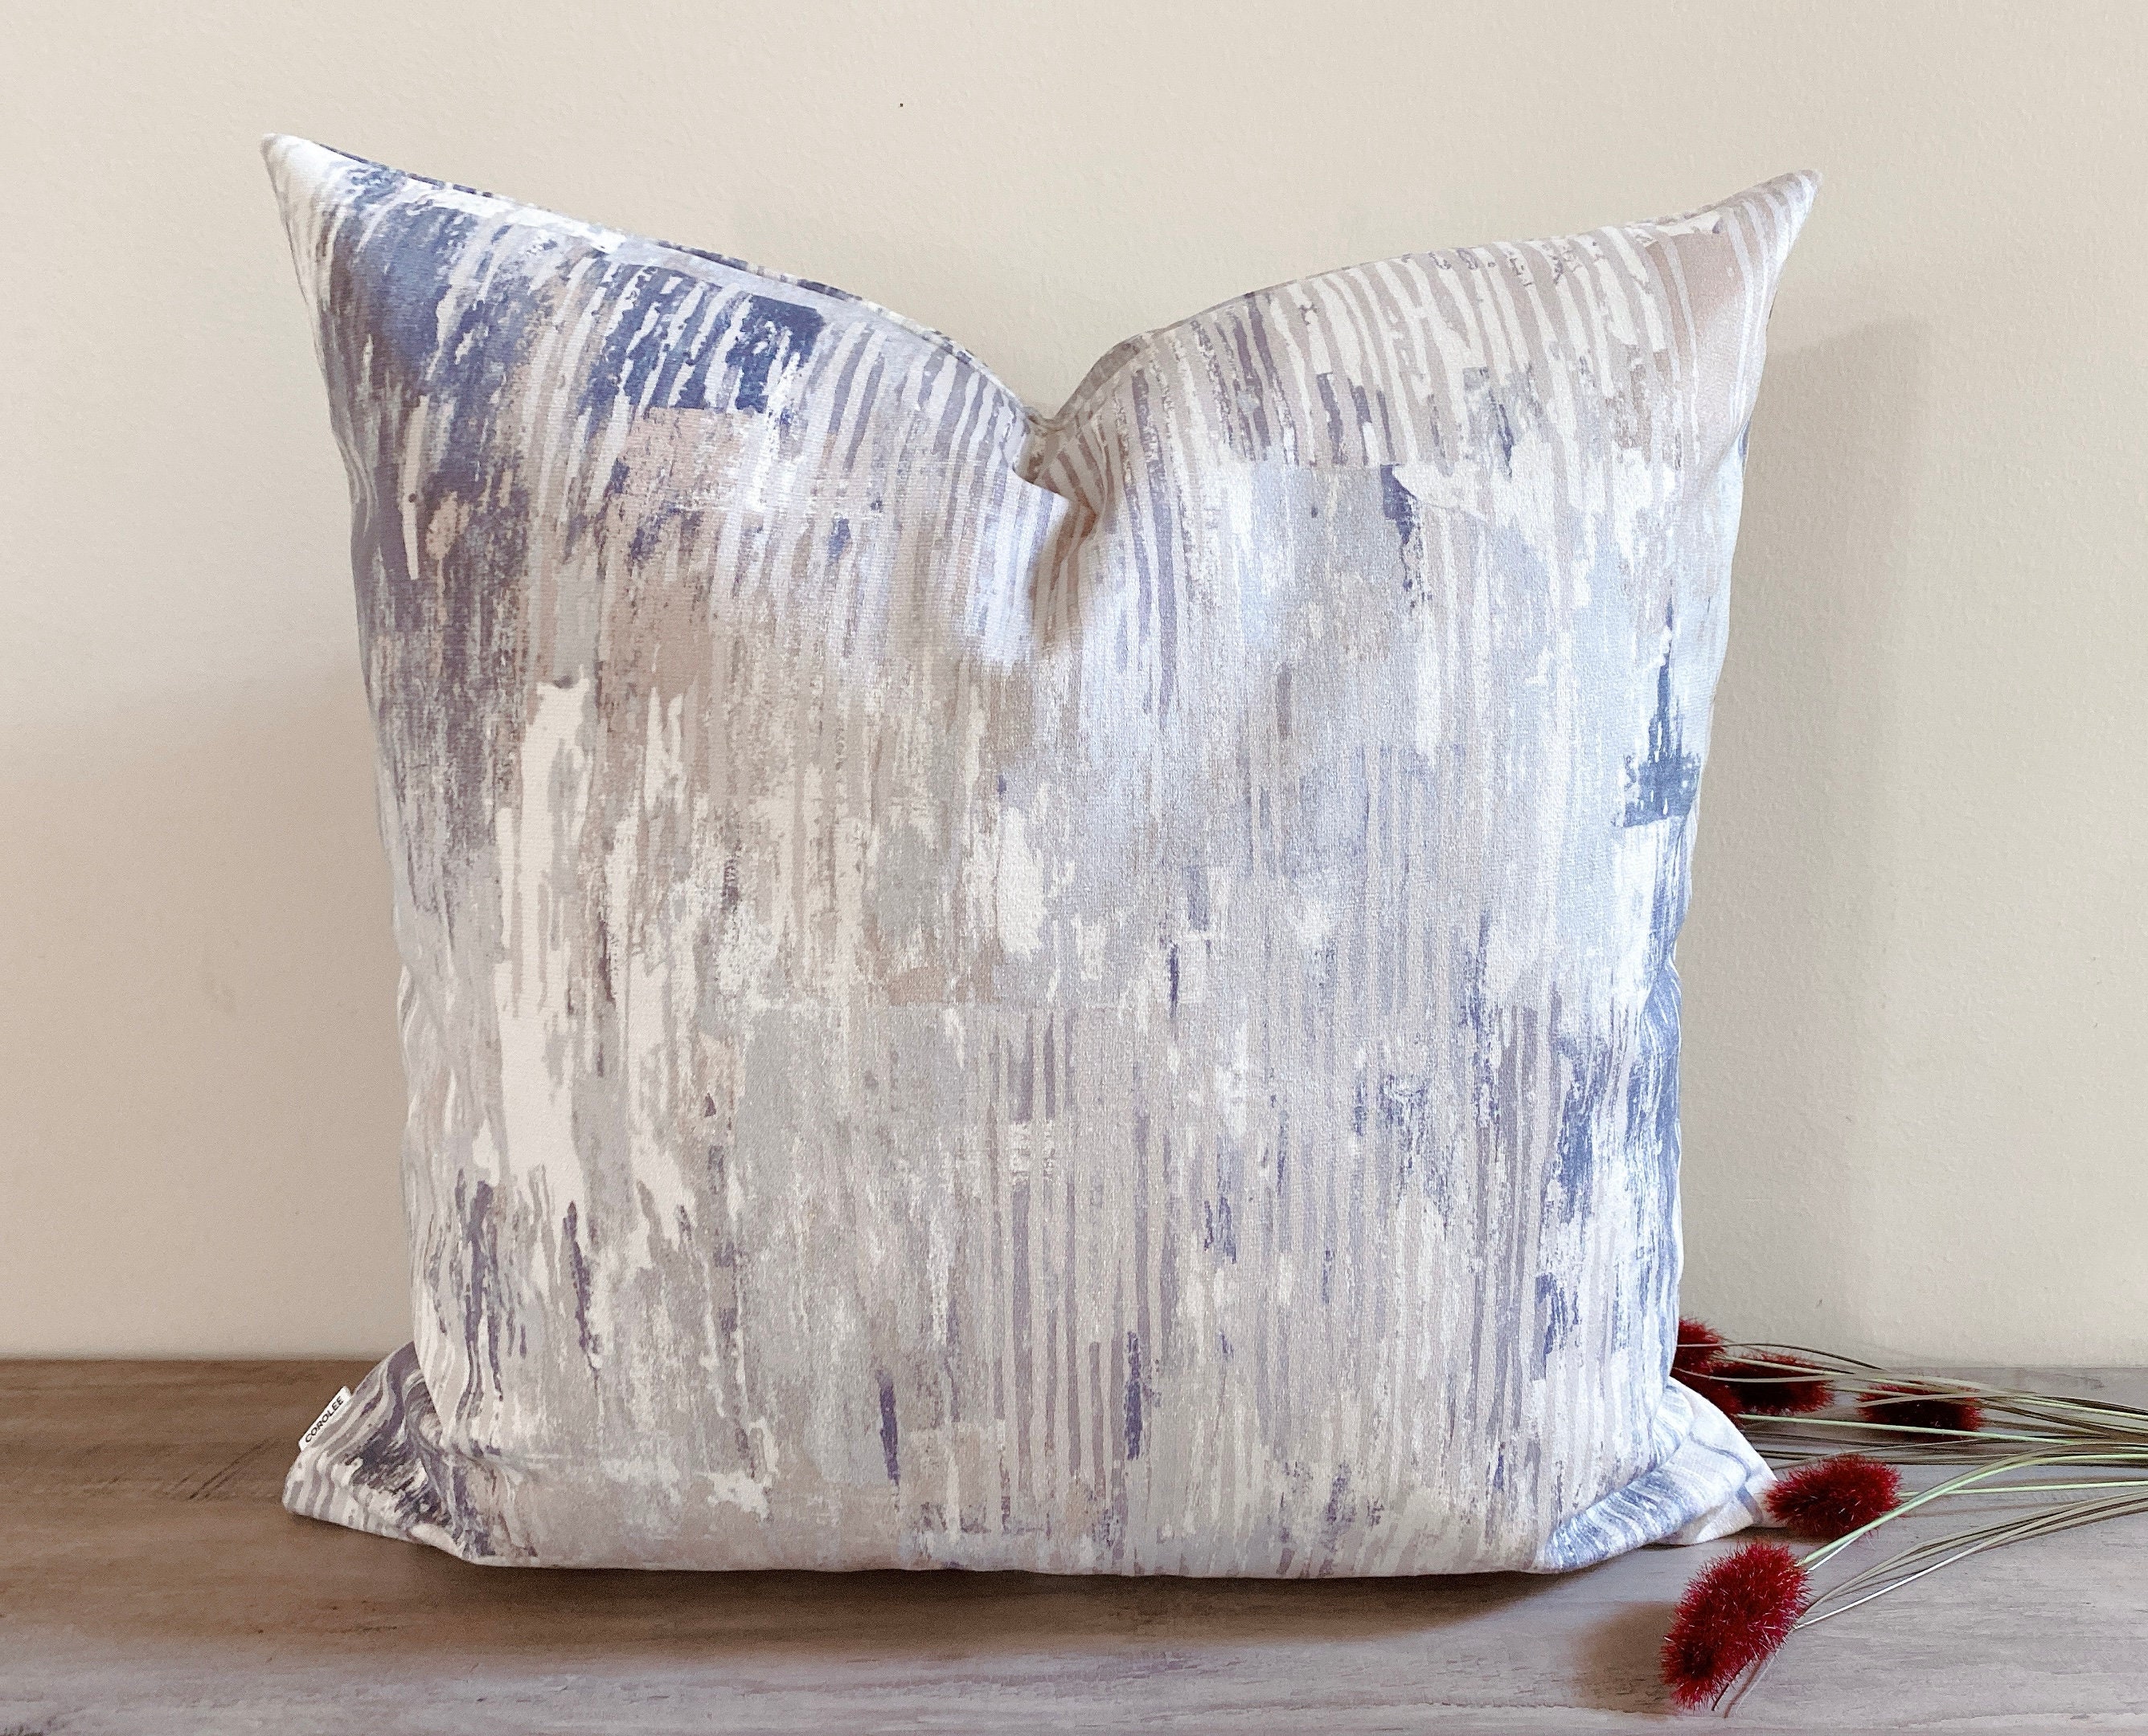 Accent Pillow-Grey And Cream Hair On Hide 18X18